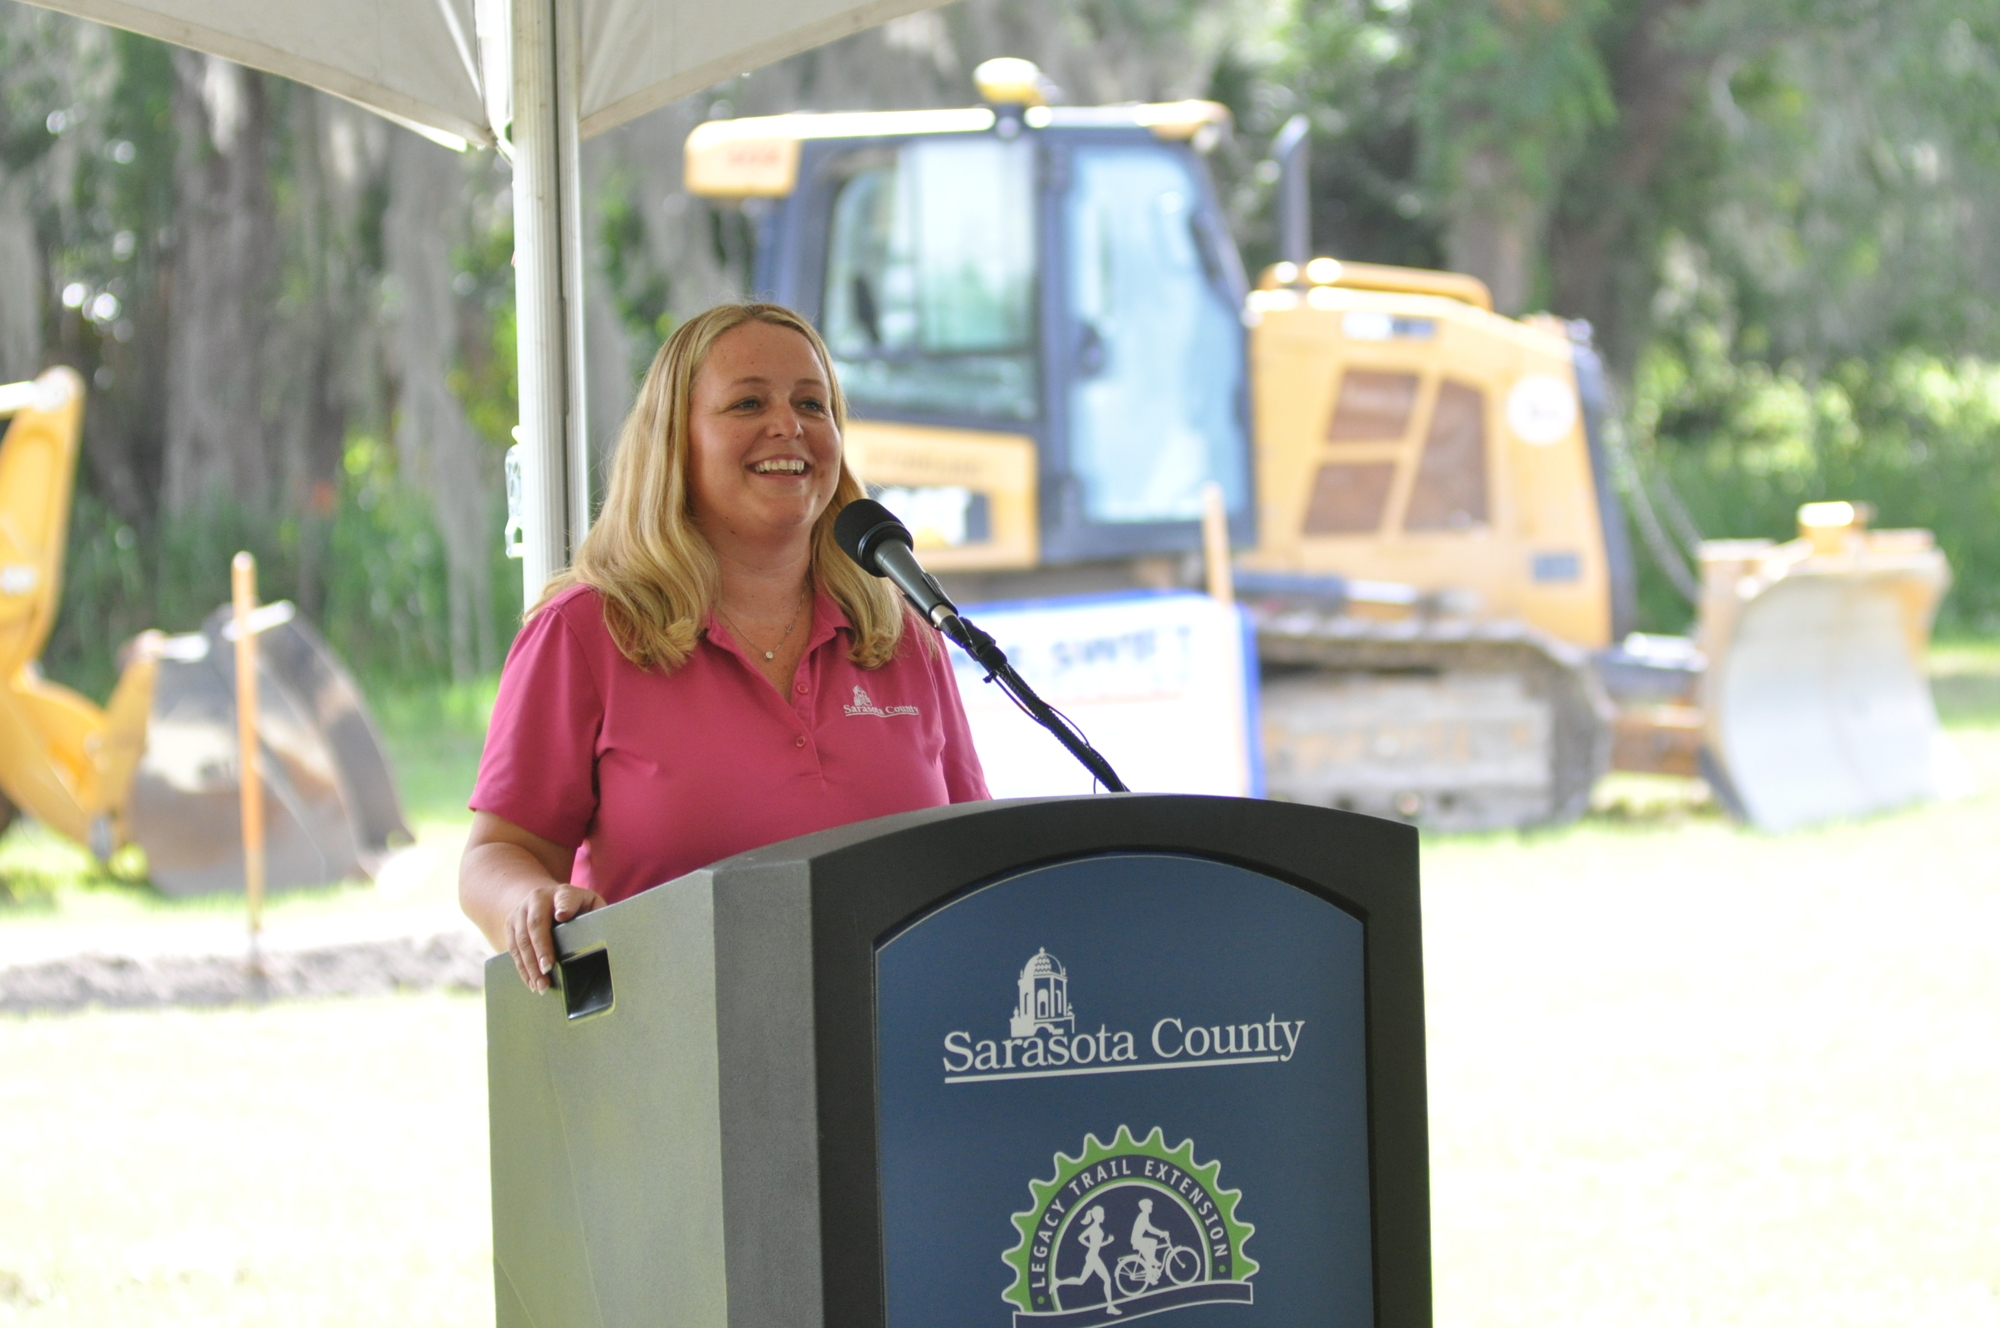 Director of Parks, Recreation and Natural Resources Nicole Rissler says upon its completion, the trail will bring a sense of pride to the community. File photo